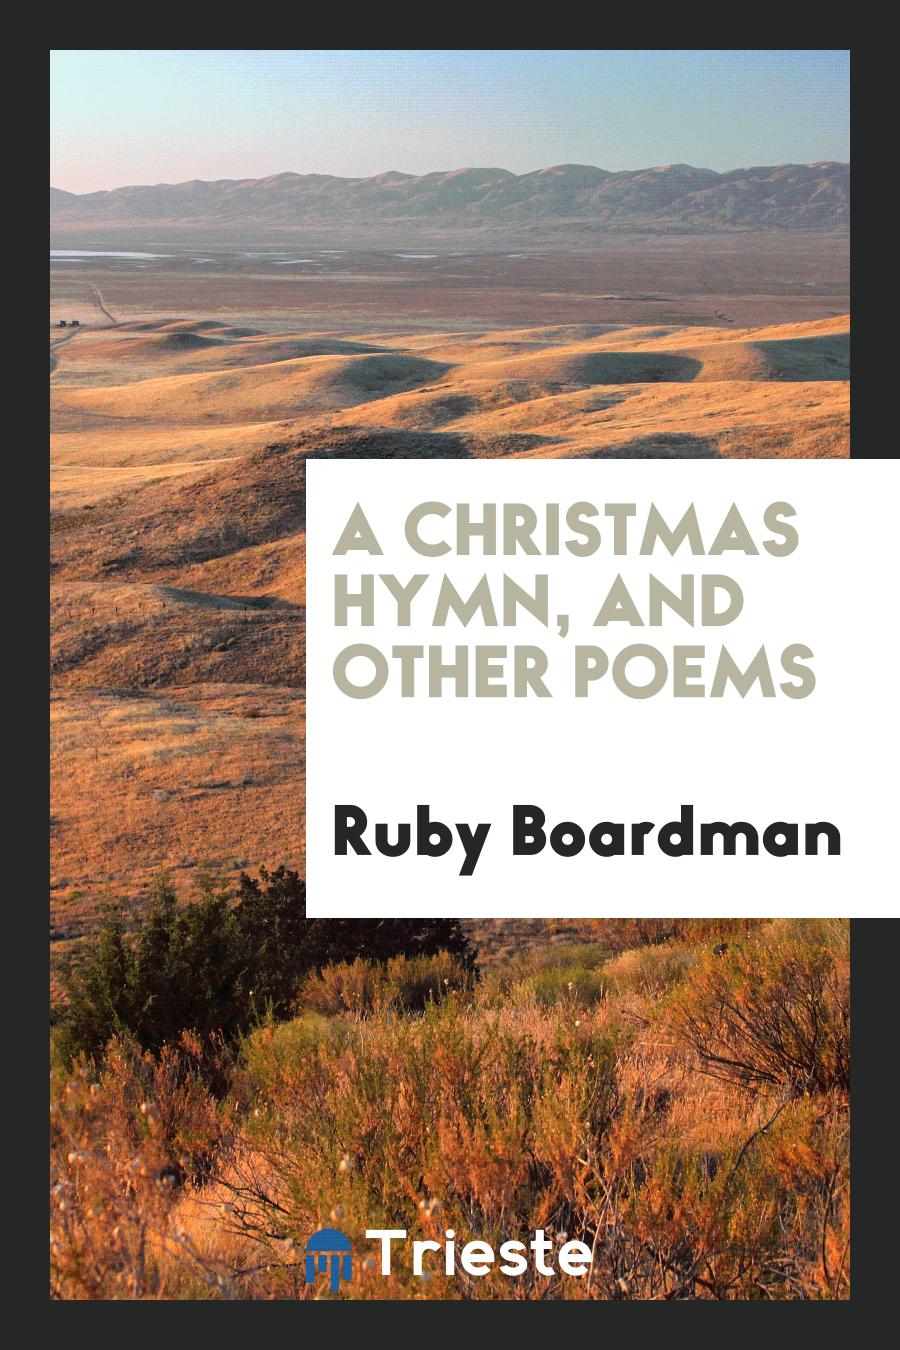 A Christmas Hymn, and Other Poems